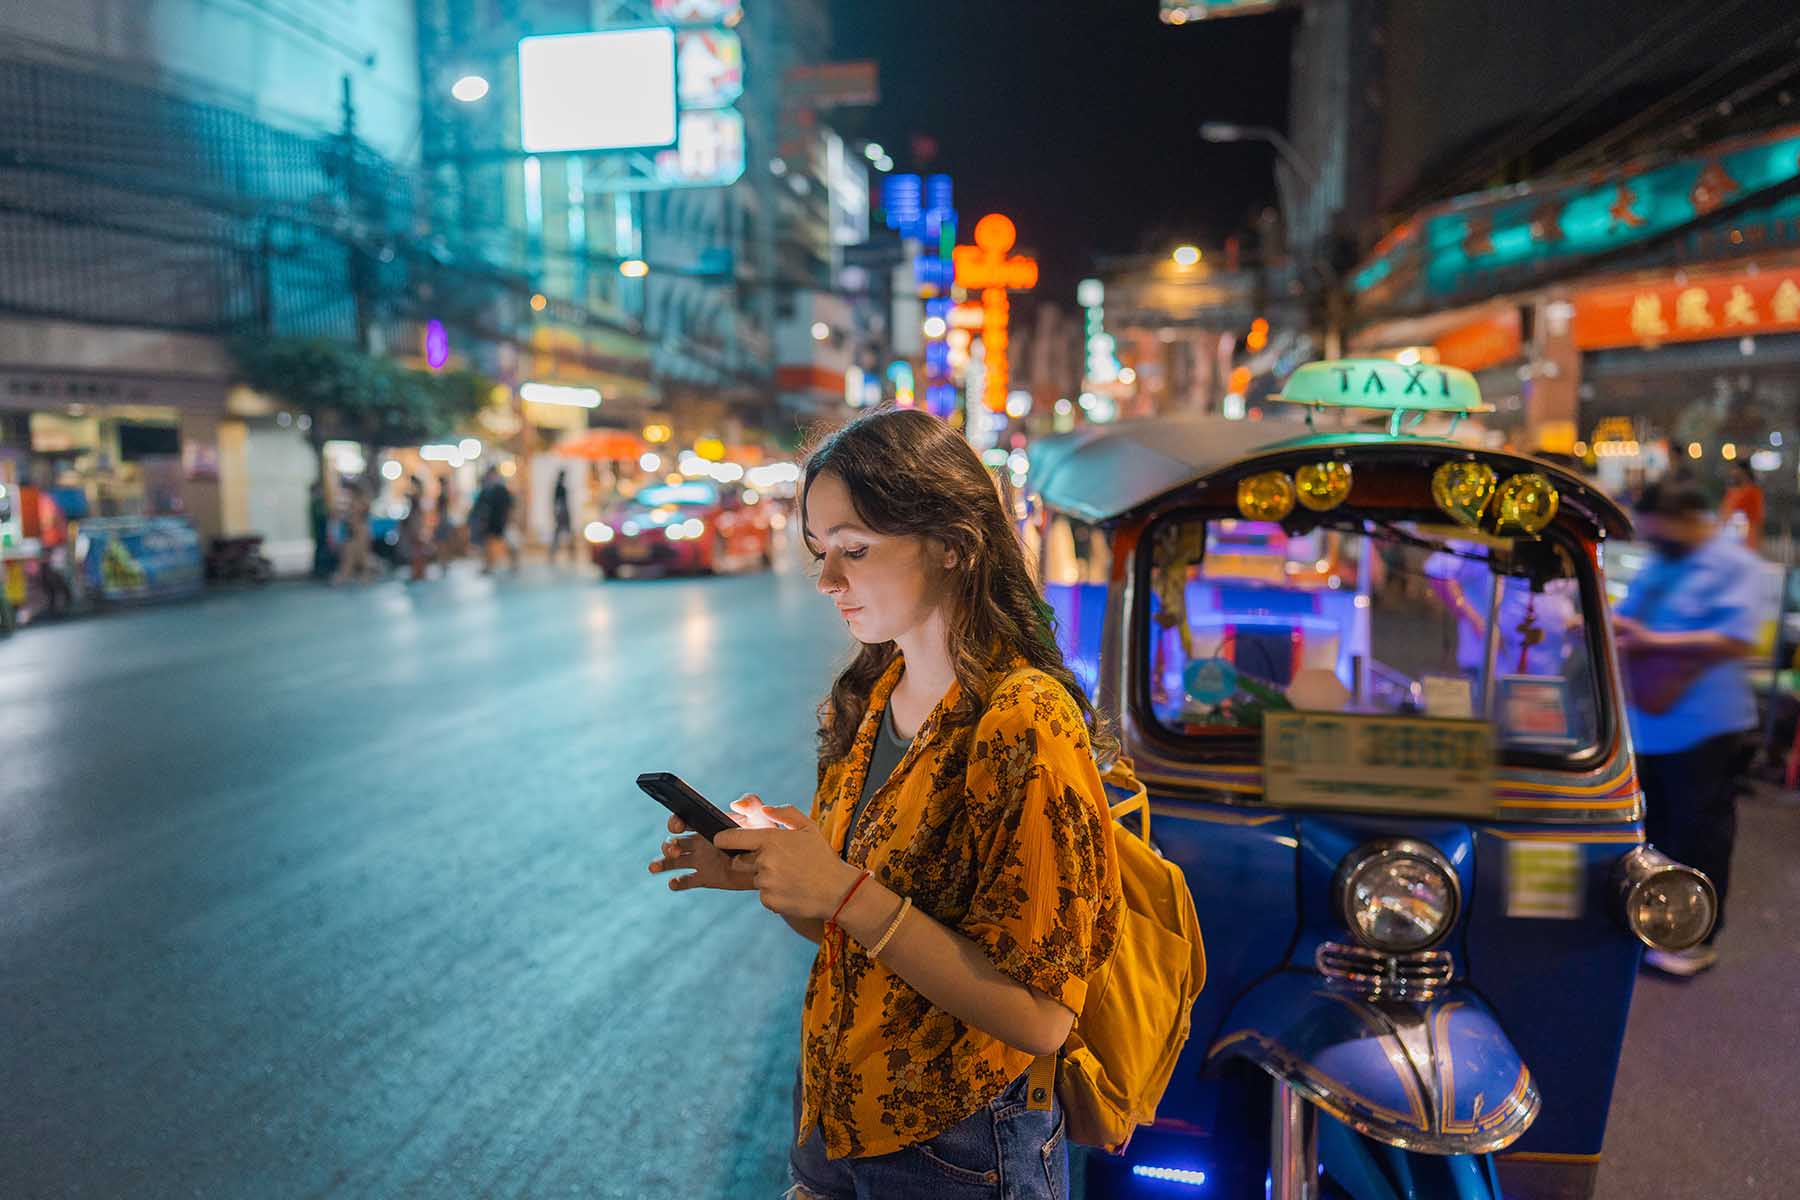 Woman looks at her mobile phone while standing in front of a tuk tuk at night on a street in Bangkok, Thailand.